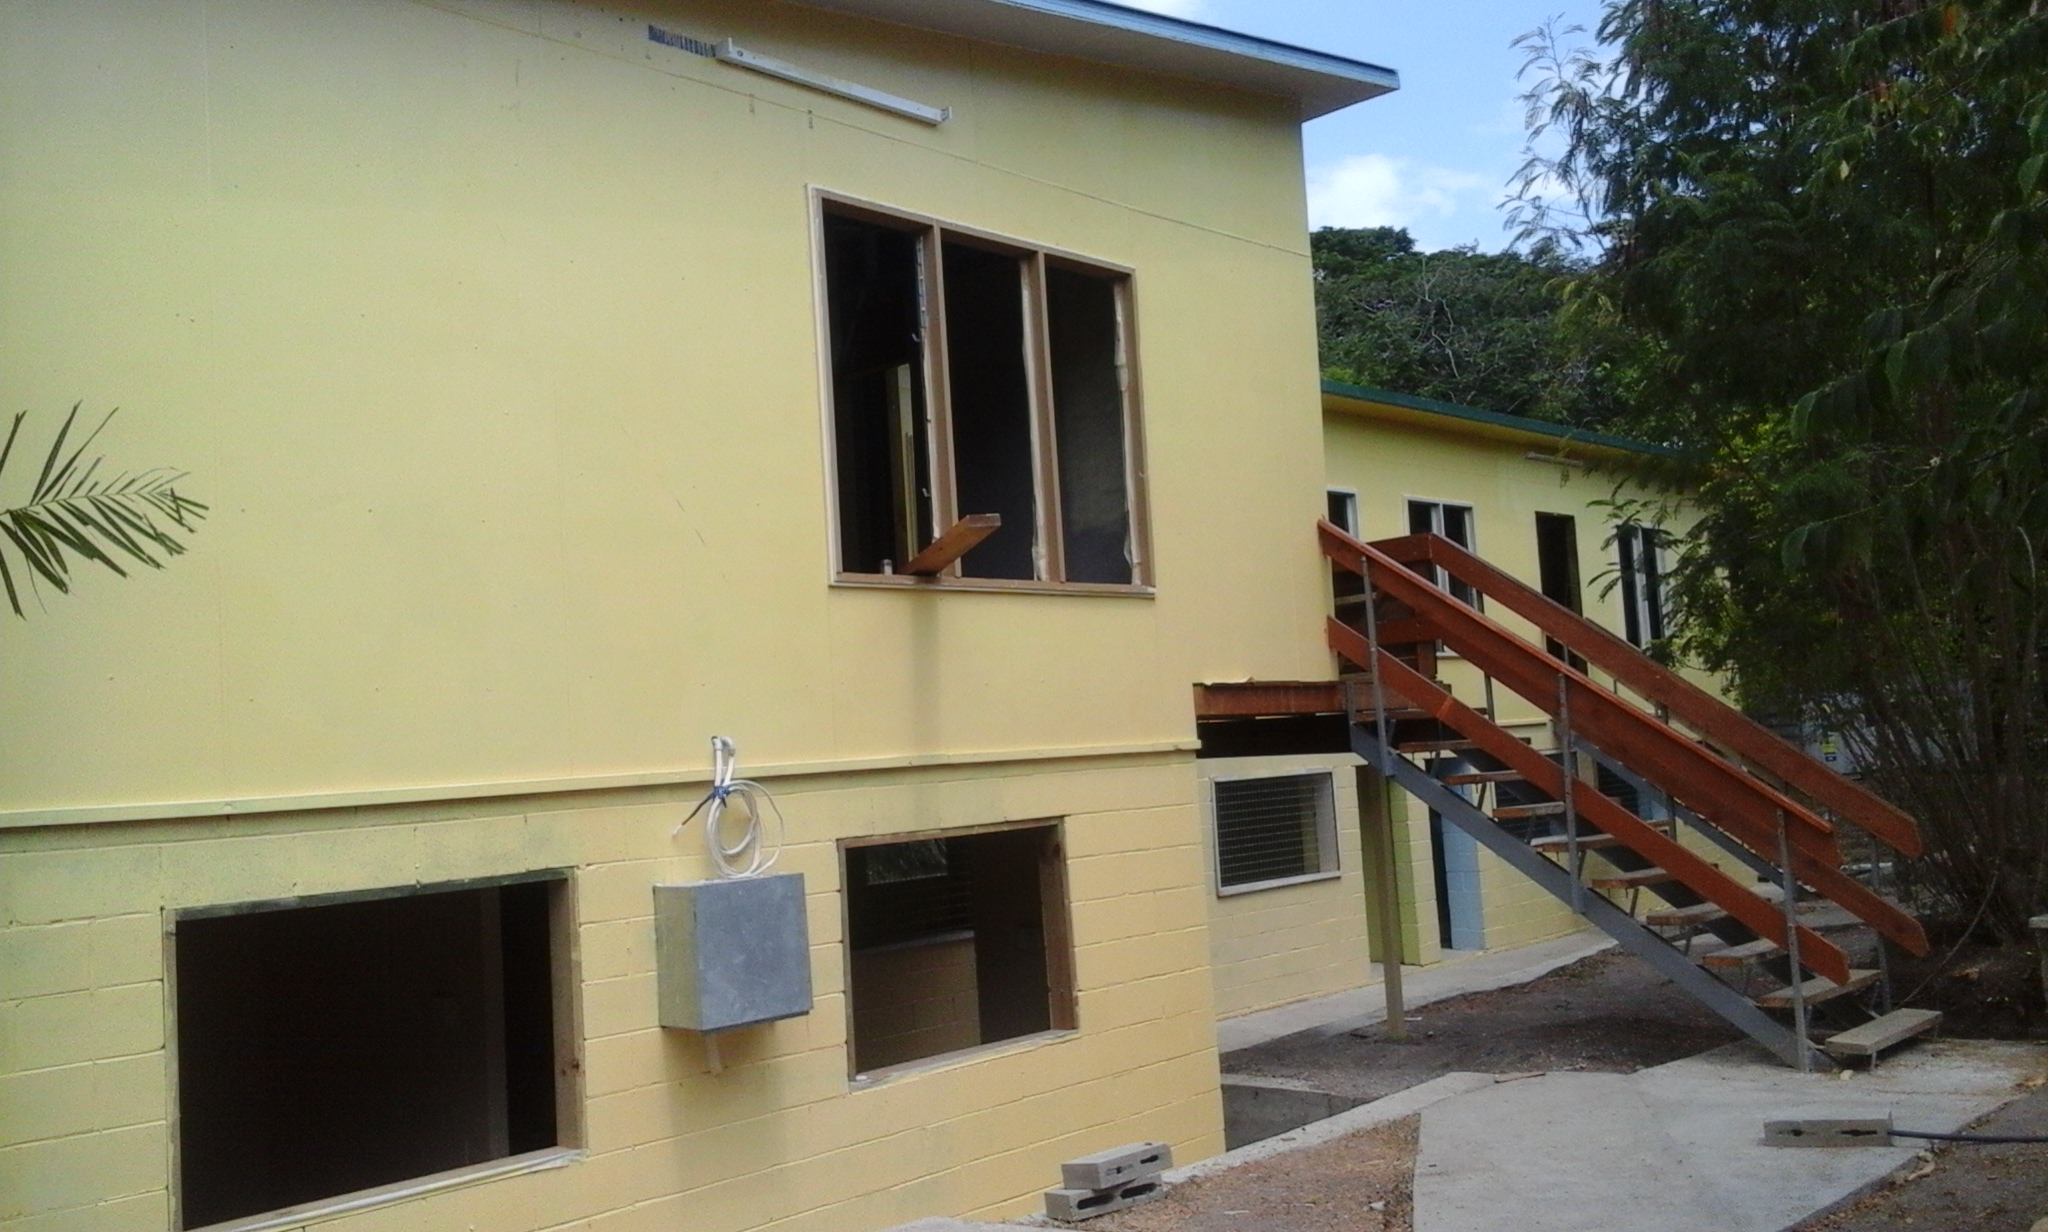 Classrooms built by the students